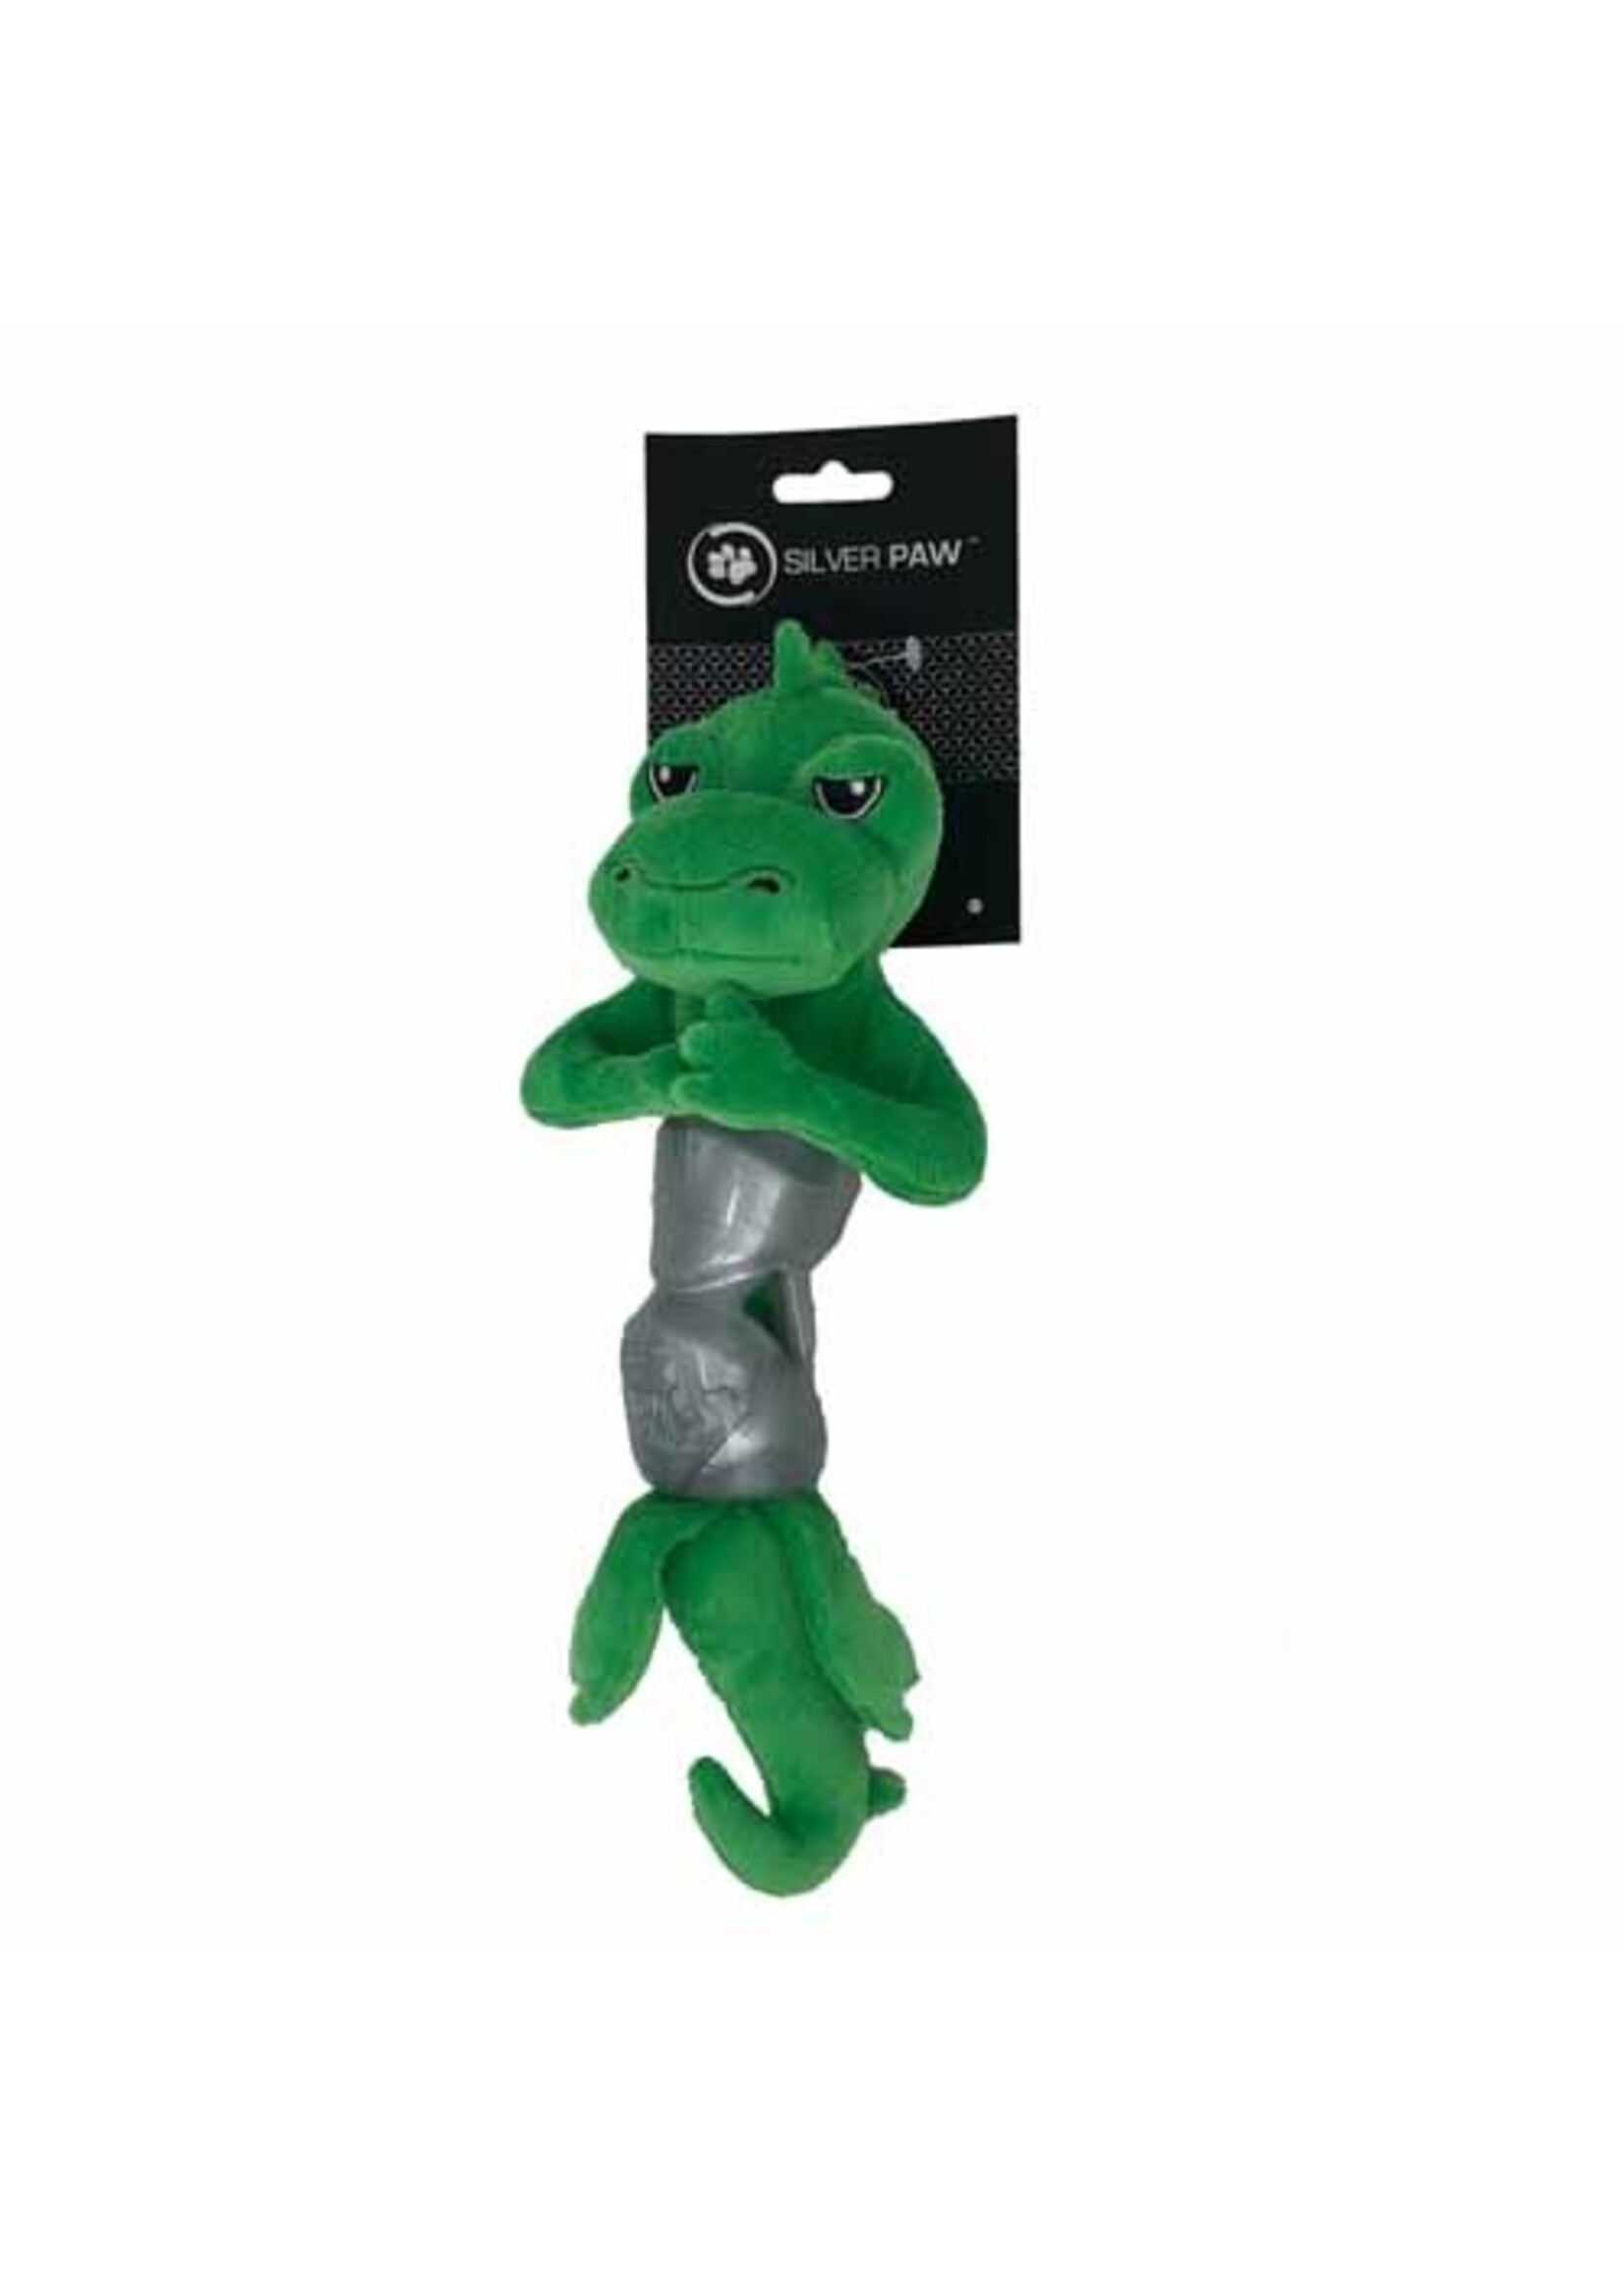 Silver Paw Silver Paw Crusha Squeezed Animal w/ TPR Rubber